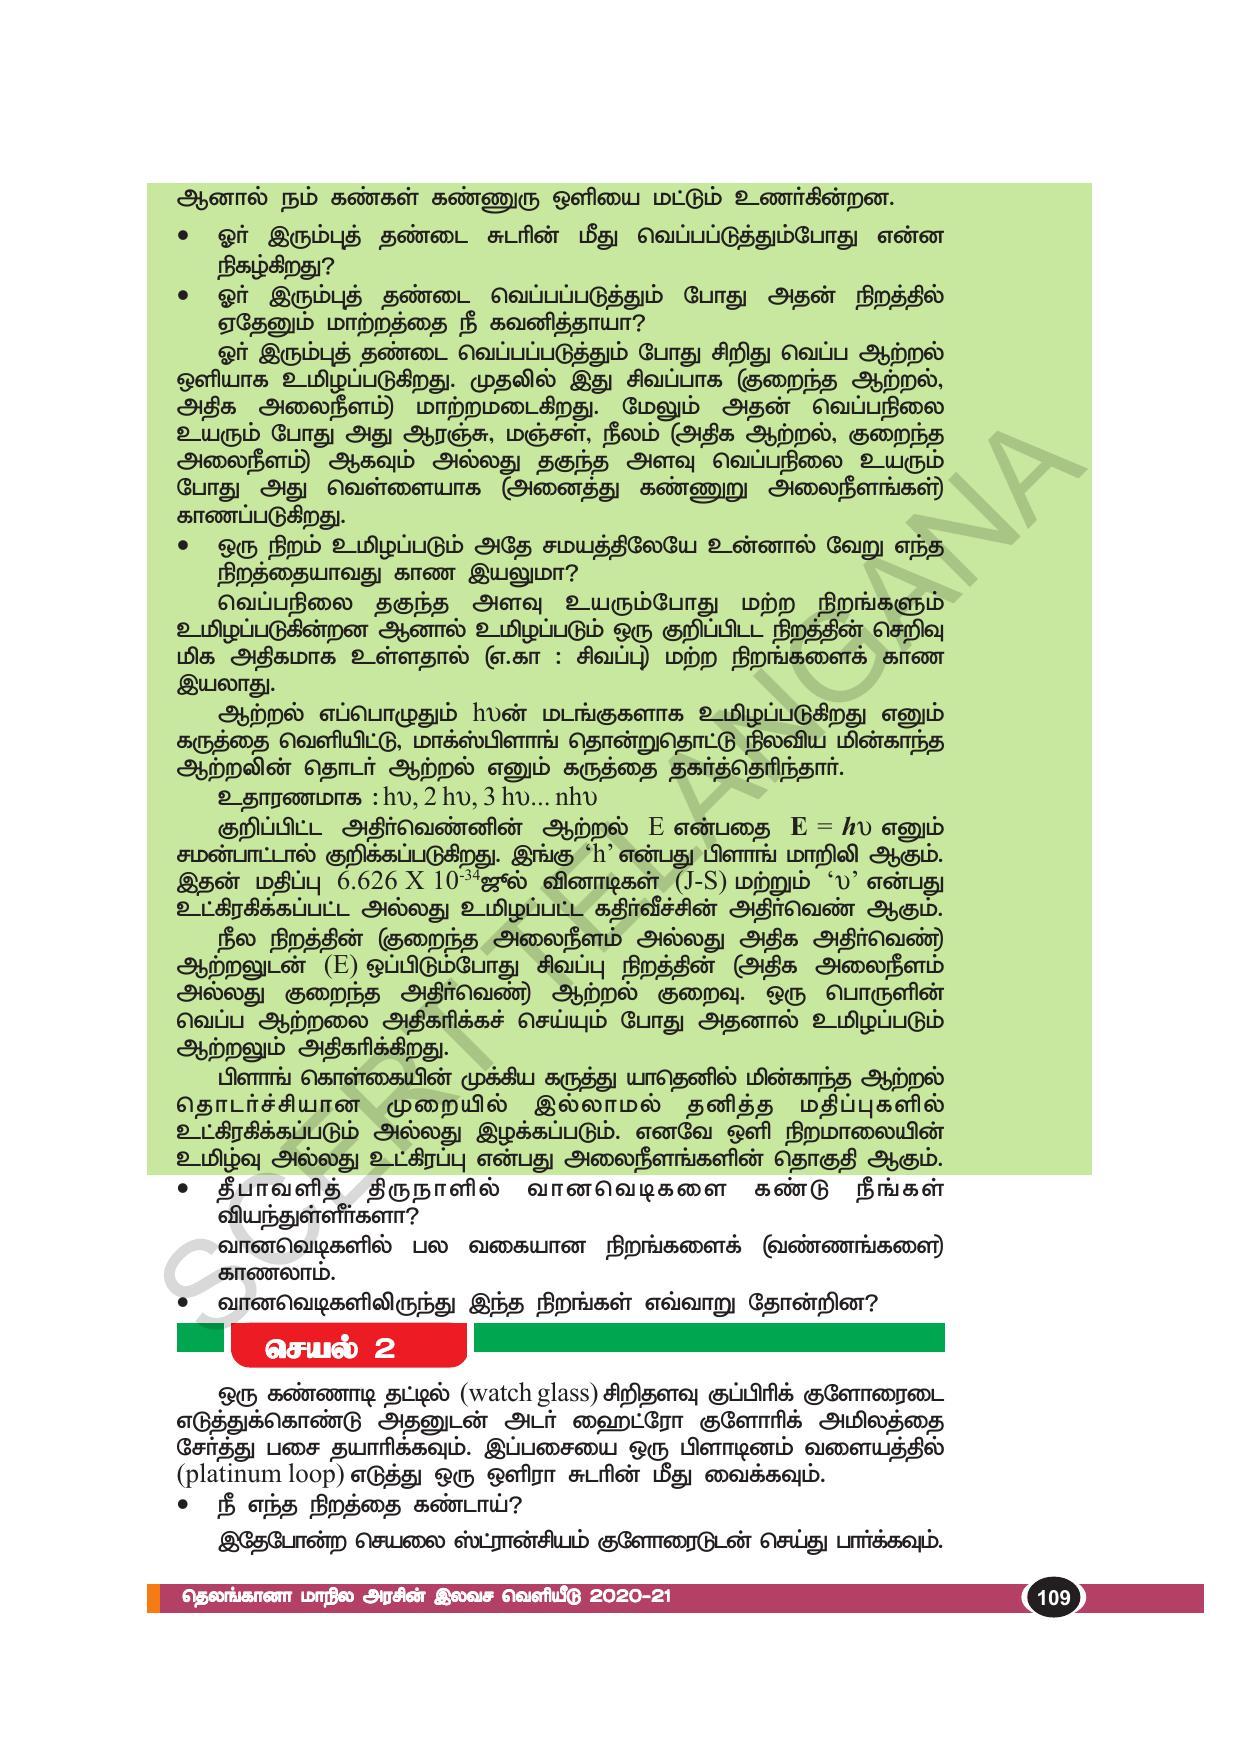 TS SCERT Class 10 Physical Science(Tamil Medium) Text Book - Page 121